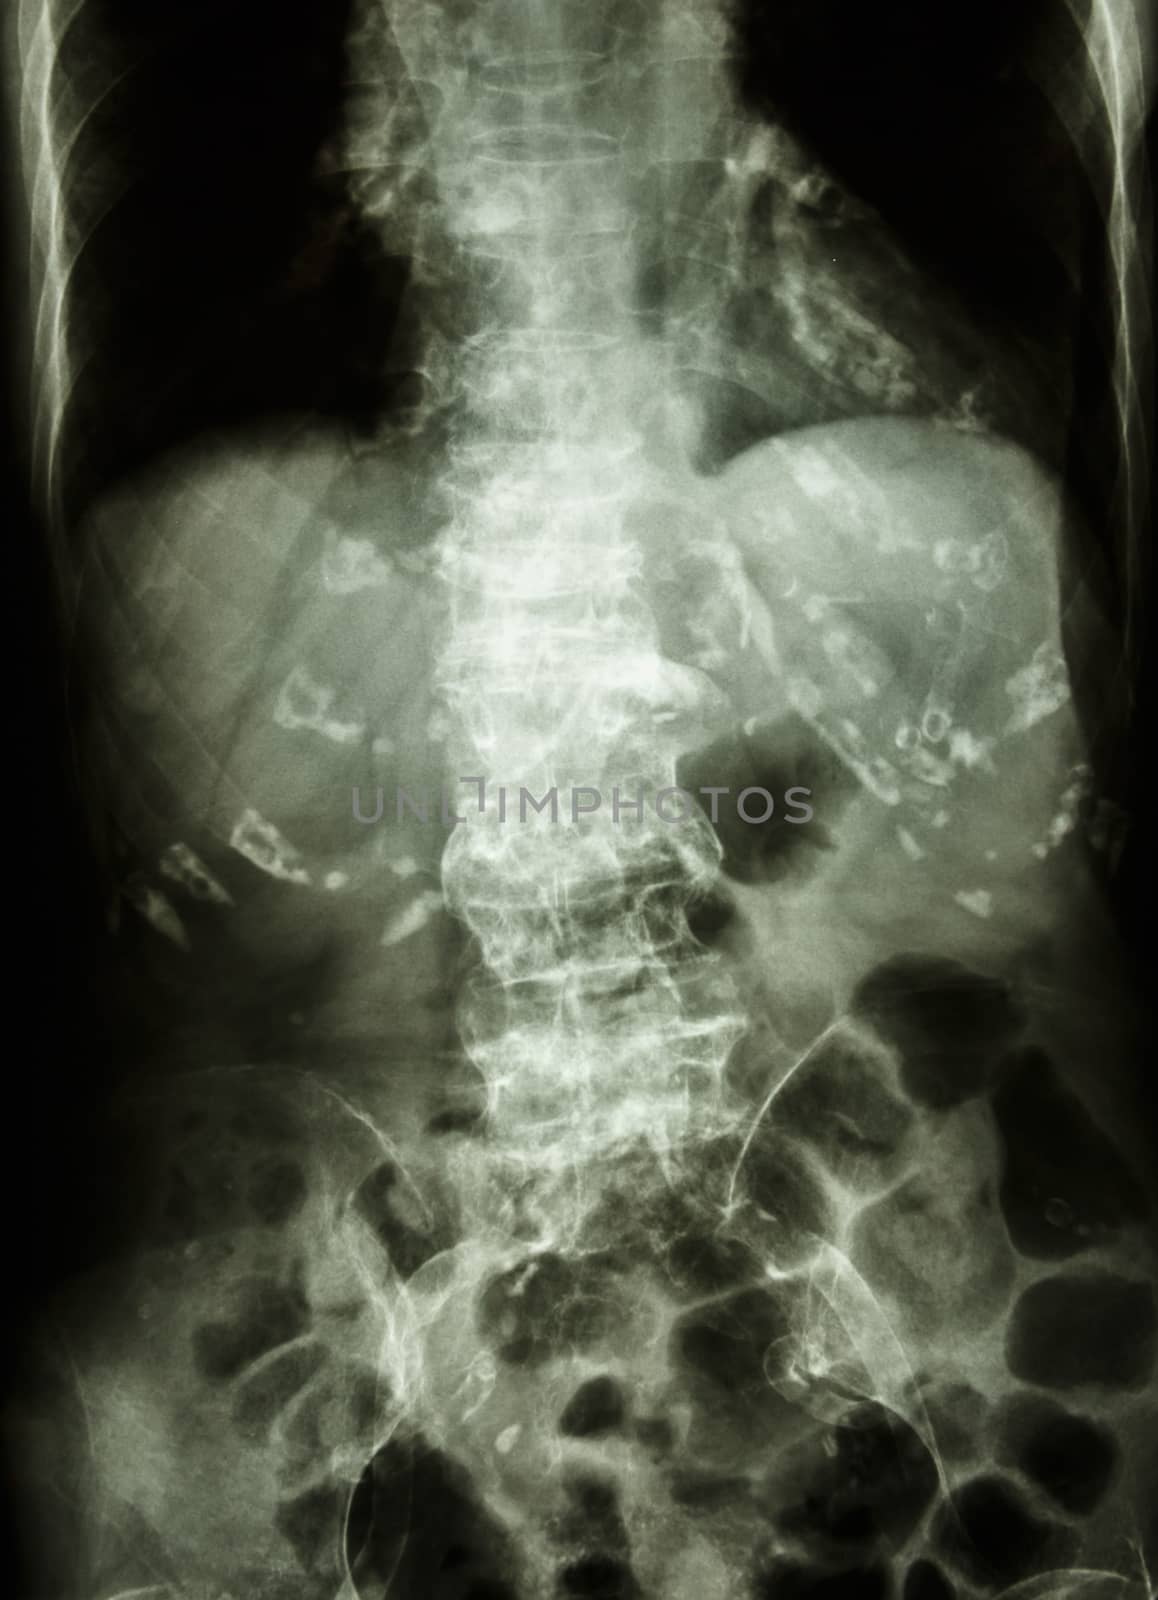 "Spondylosis" Film x-ray abdomen of old aged human : show spine with spur and calcification at multiple bone & vessels